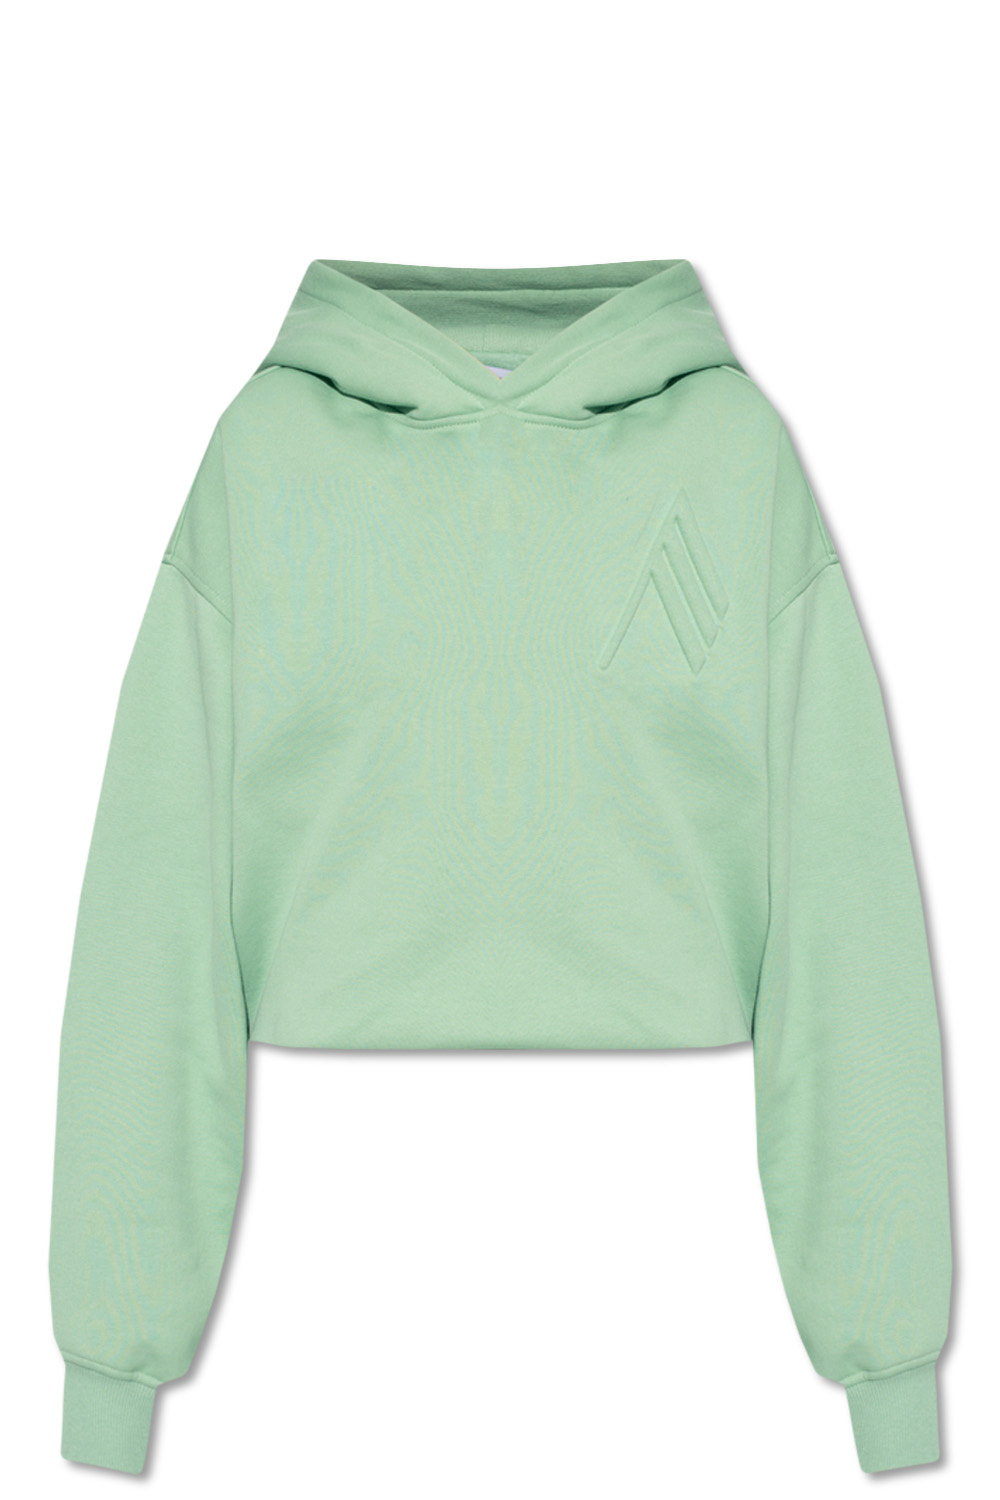 The Attico ‘Maeve’ hoodie with logo